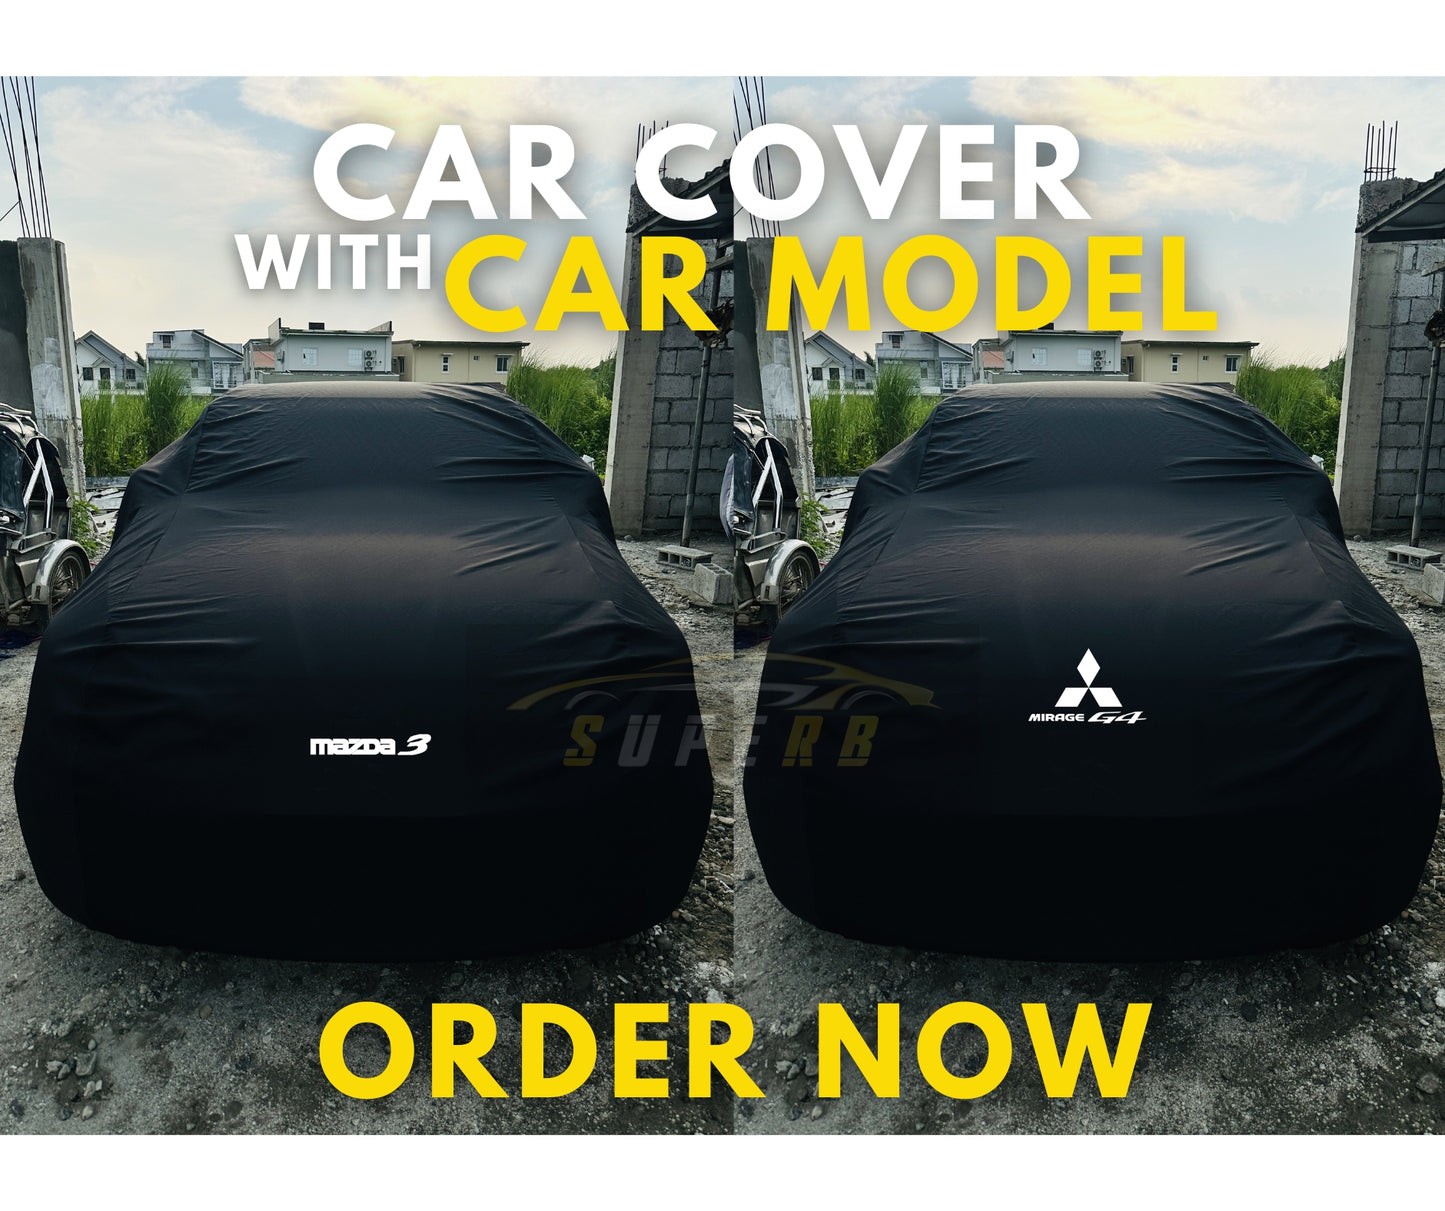 SUPERB CLASSIC CAR COVER with CAR MODELS